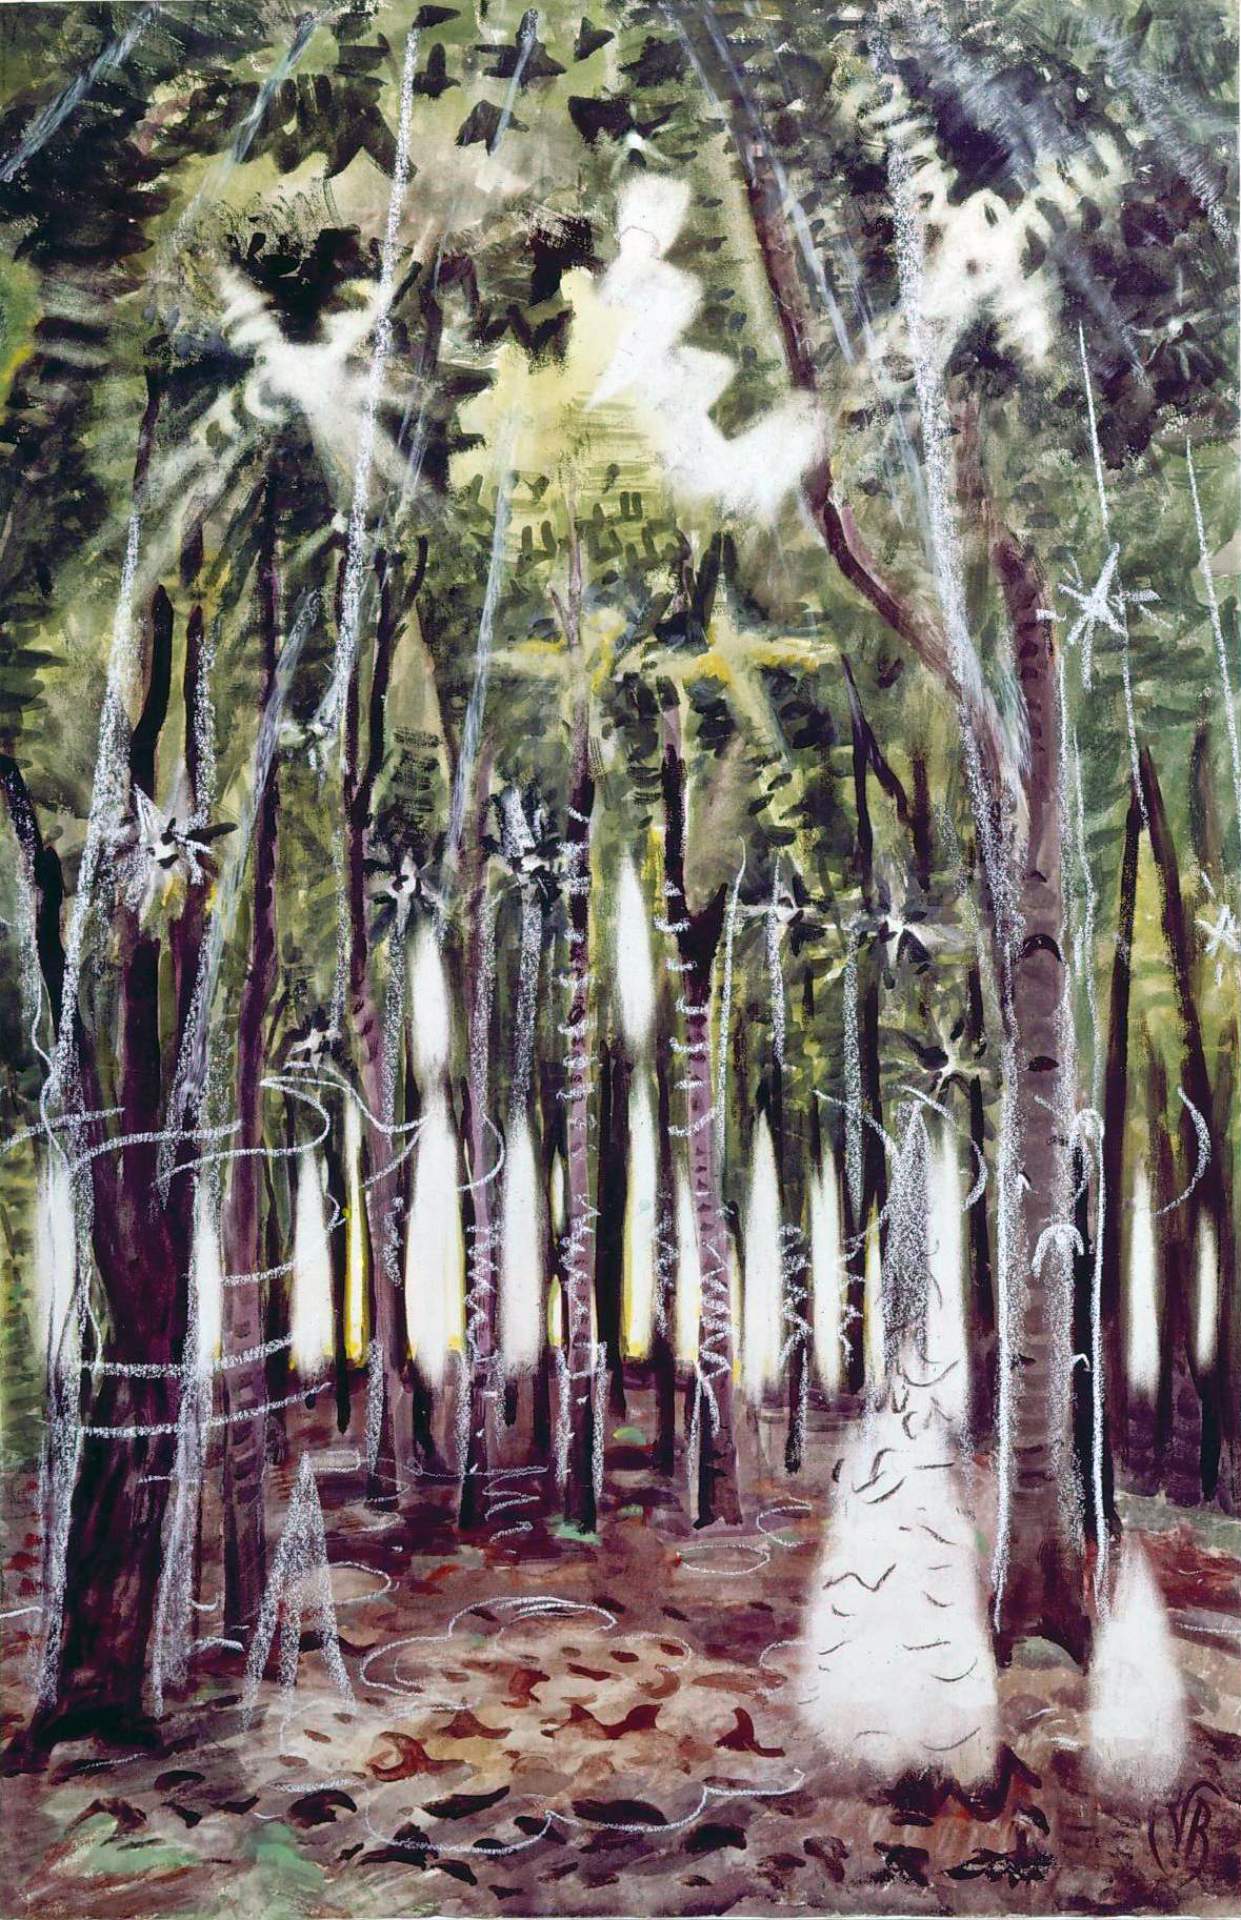 Thoughts on Burchfield by Brian Frink